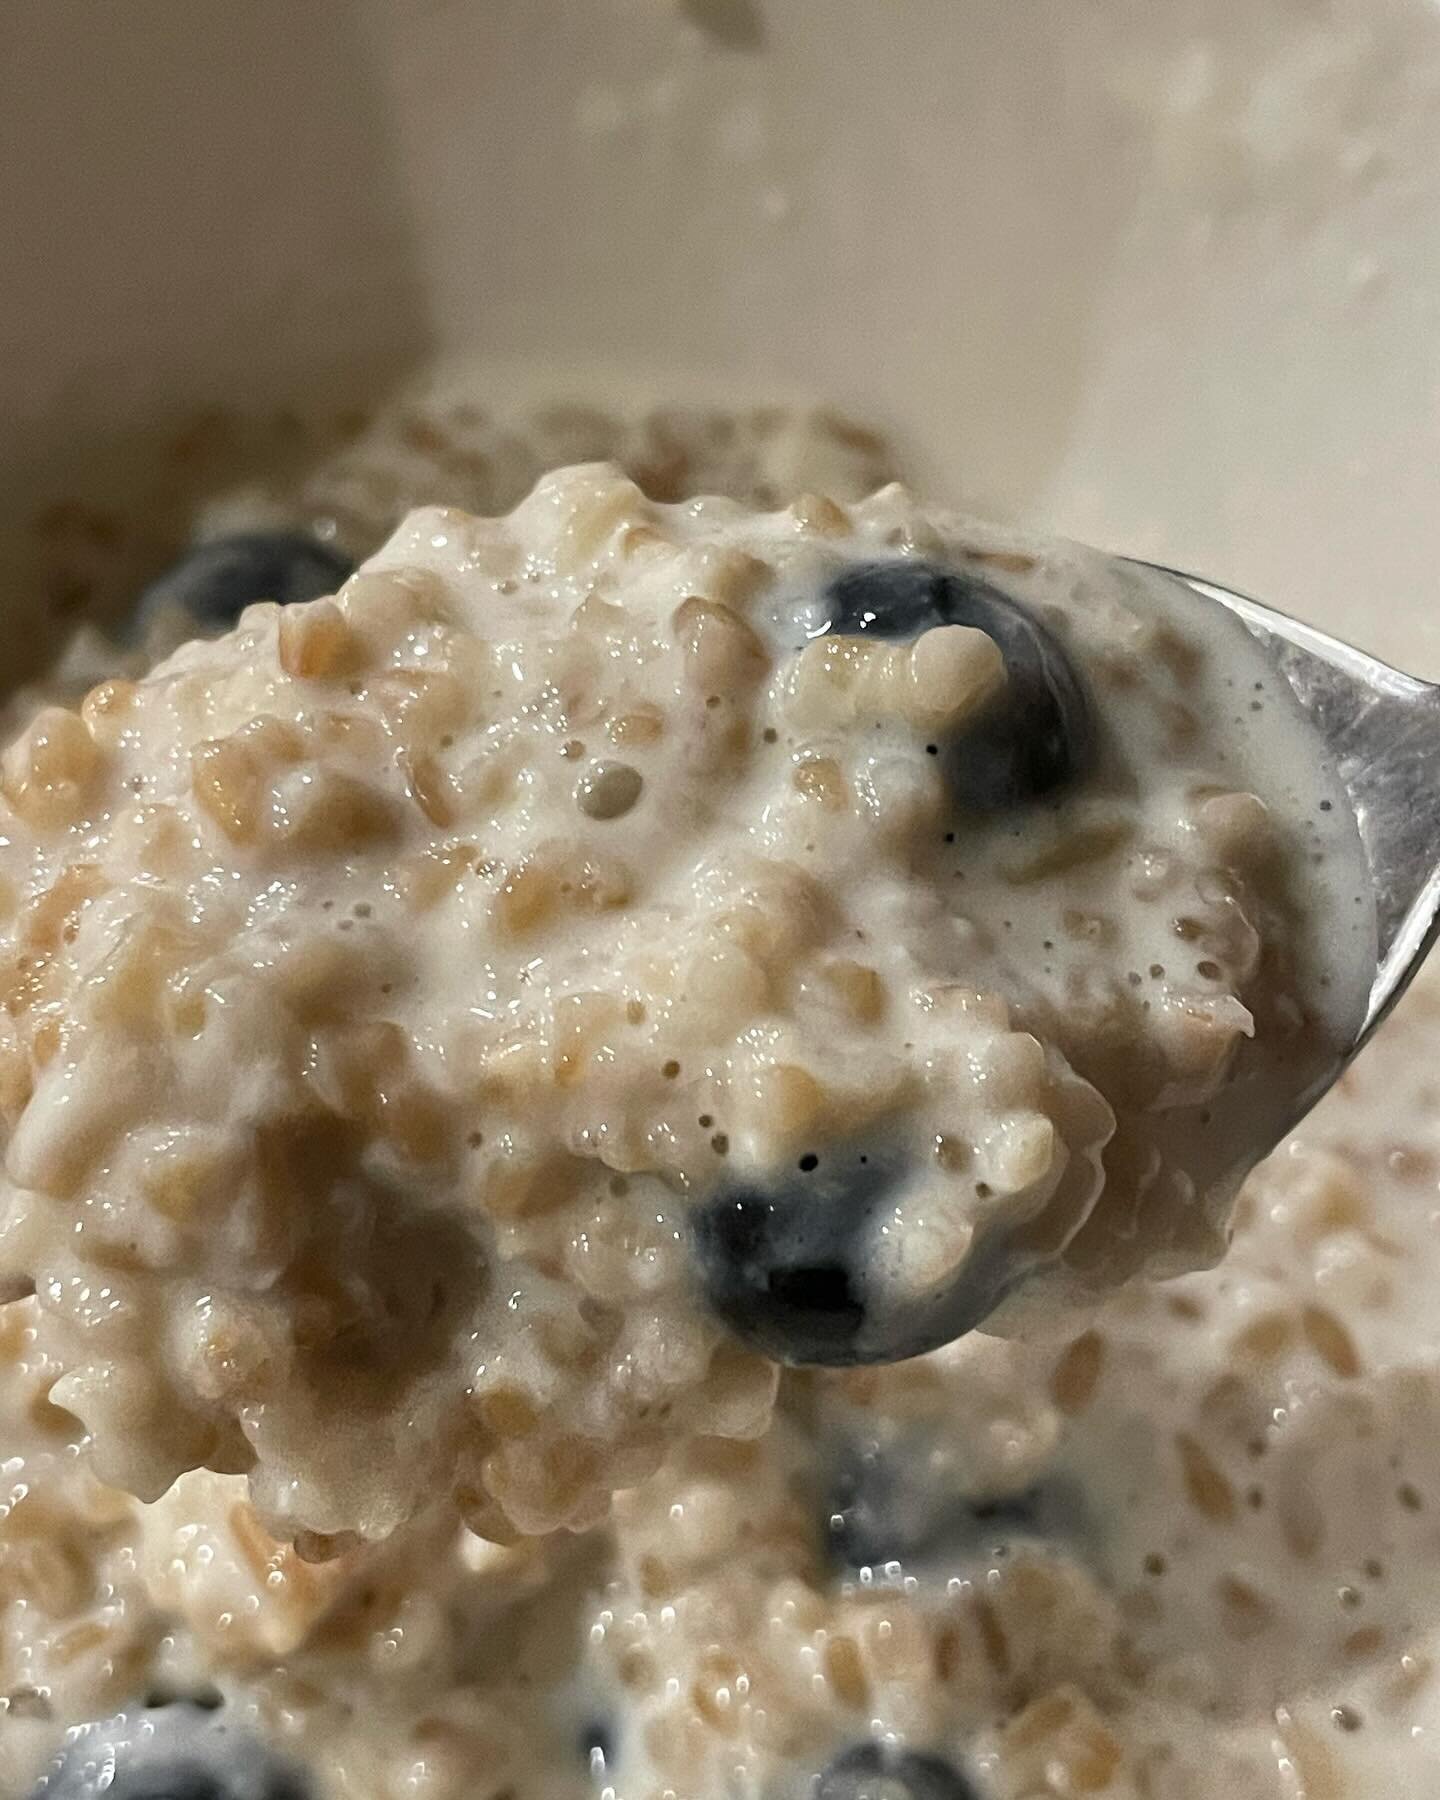 Irish steel cut oats w cream,
Blueberries and maple syrup&hellip; so good, since focusing an animal based diet I have avoided oats, but have been craving them&hellip; they take awhile to cook but are worth the wait.. I love steel cut oatmeal!! 
.
.
.